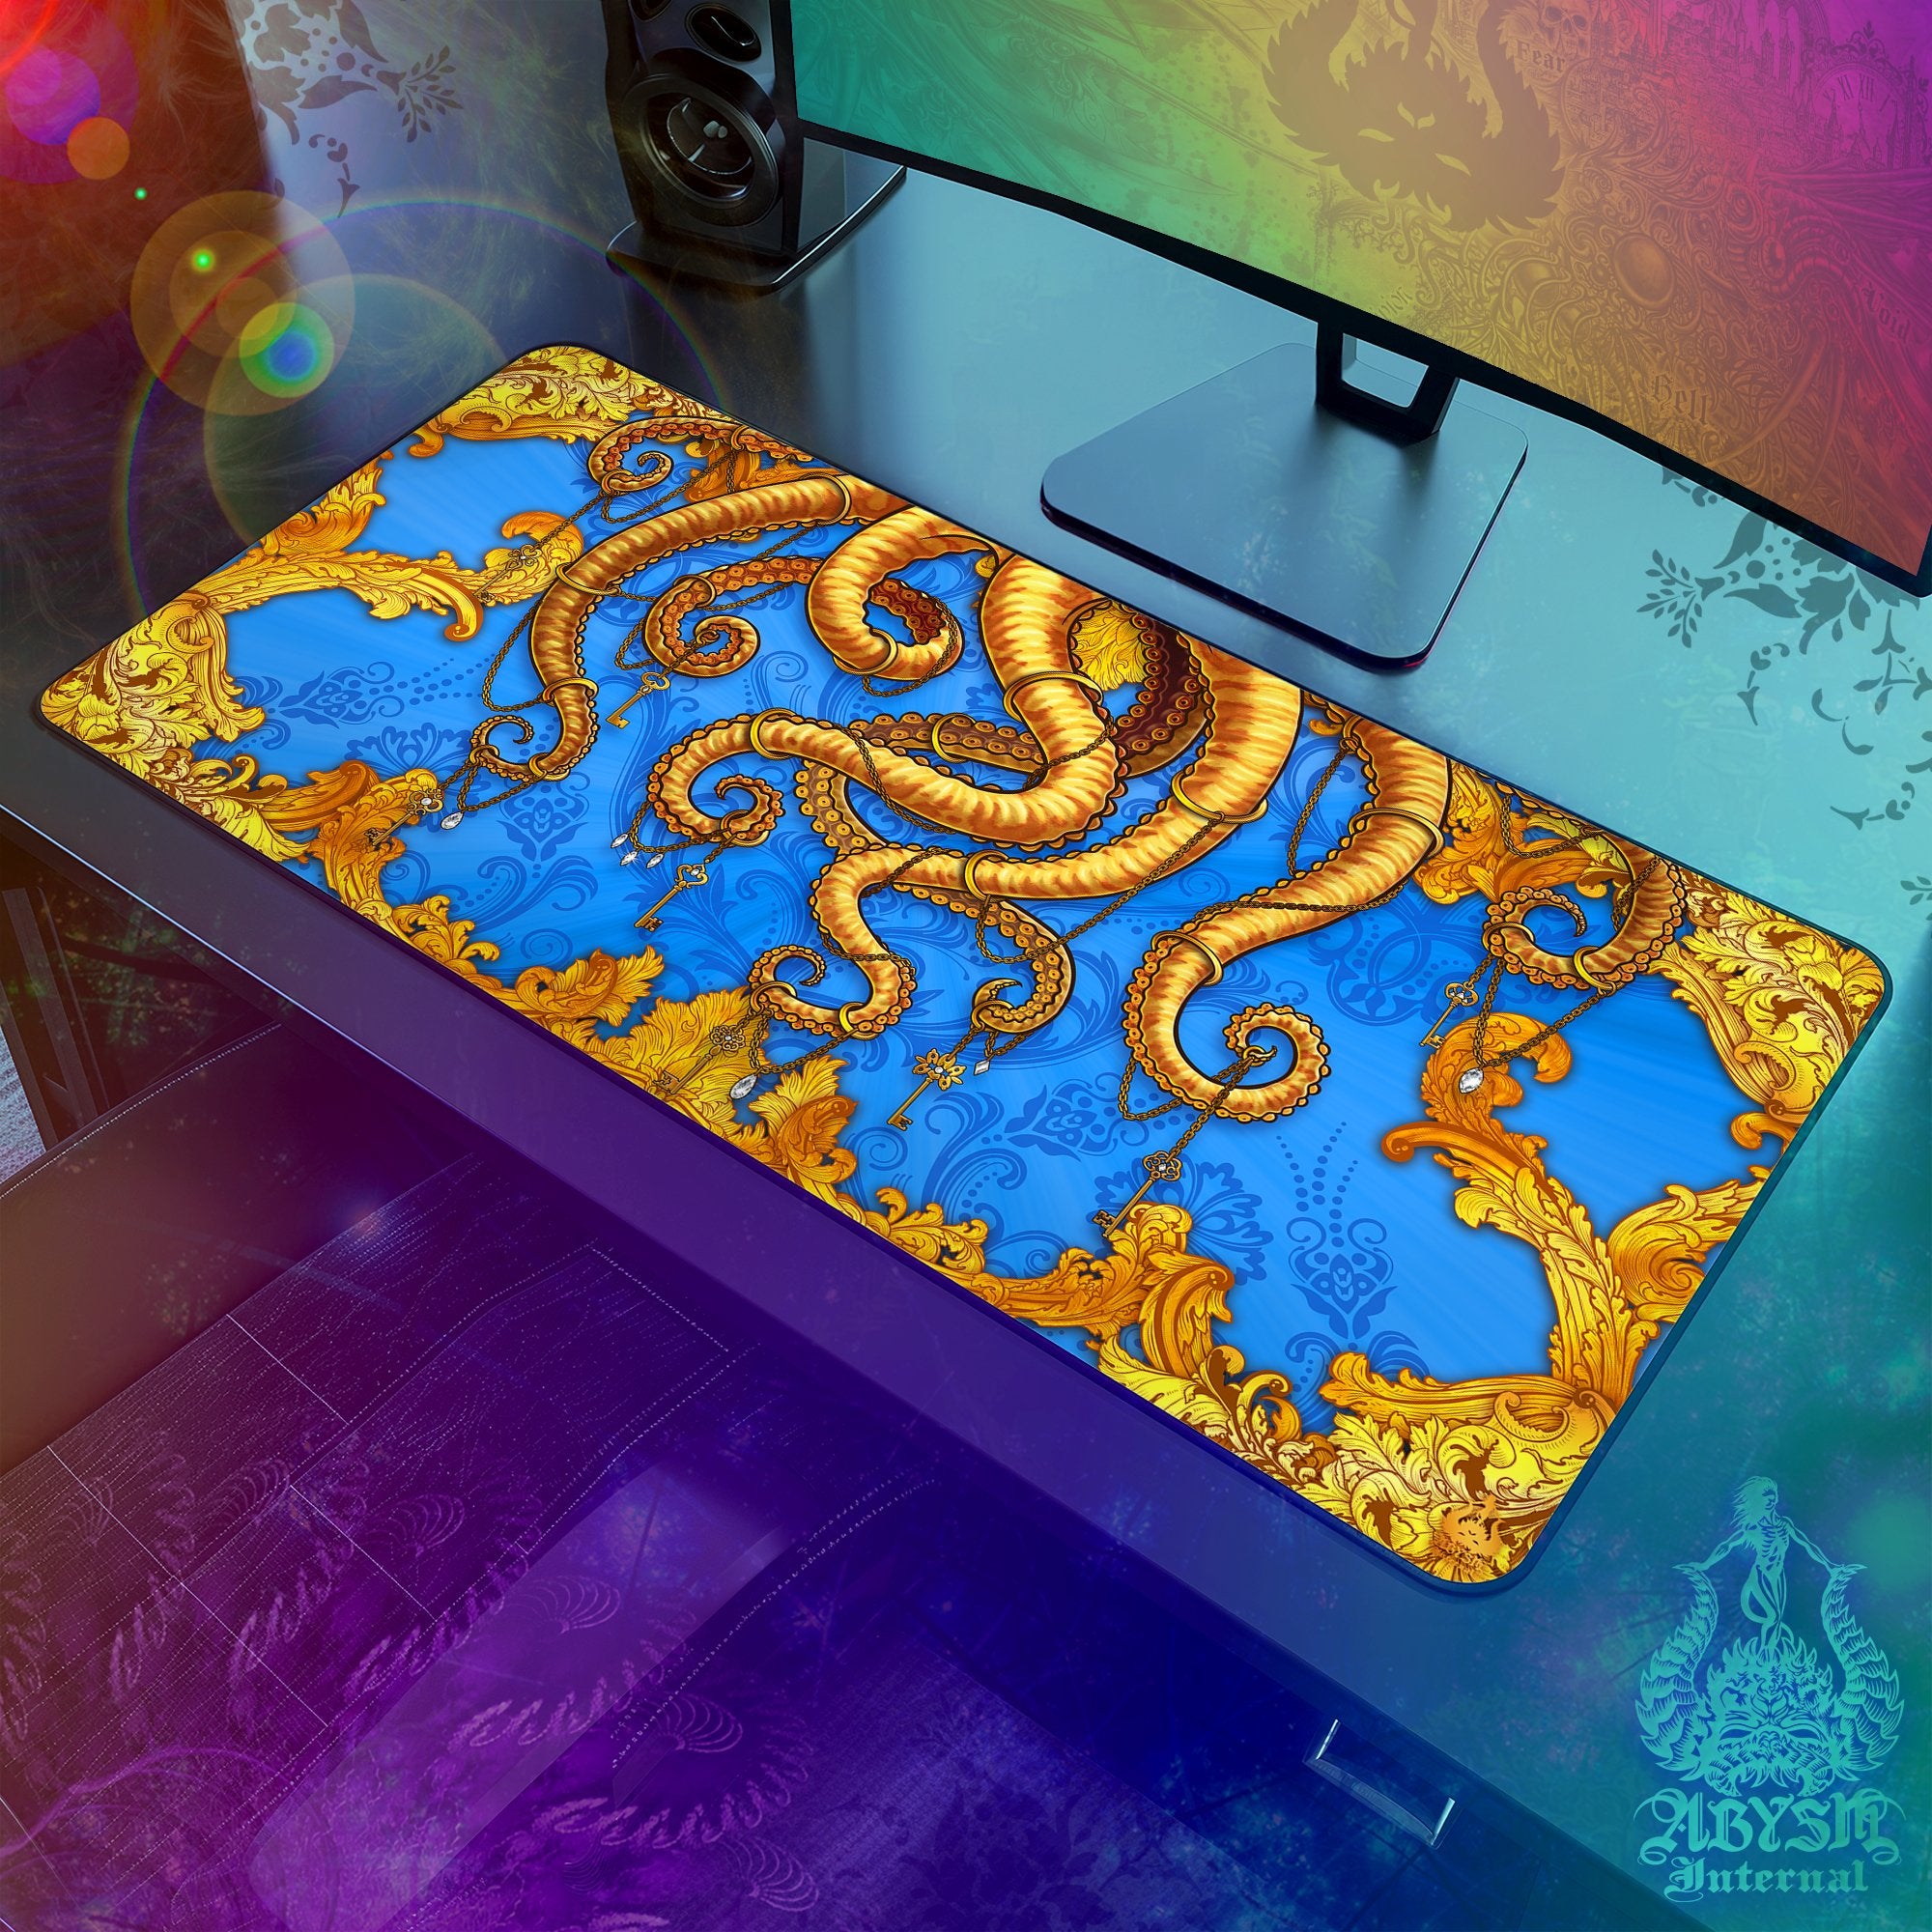 Octopus Workpad, Tentacles Desk Mat, Colorful Gaming Mouse Pad, Cyan Gold Table Protector Cover, Fantasy Art Print - Abysm Internal